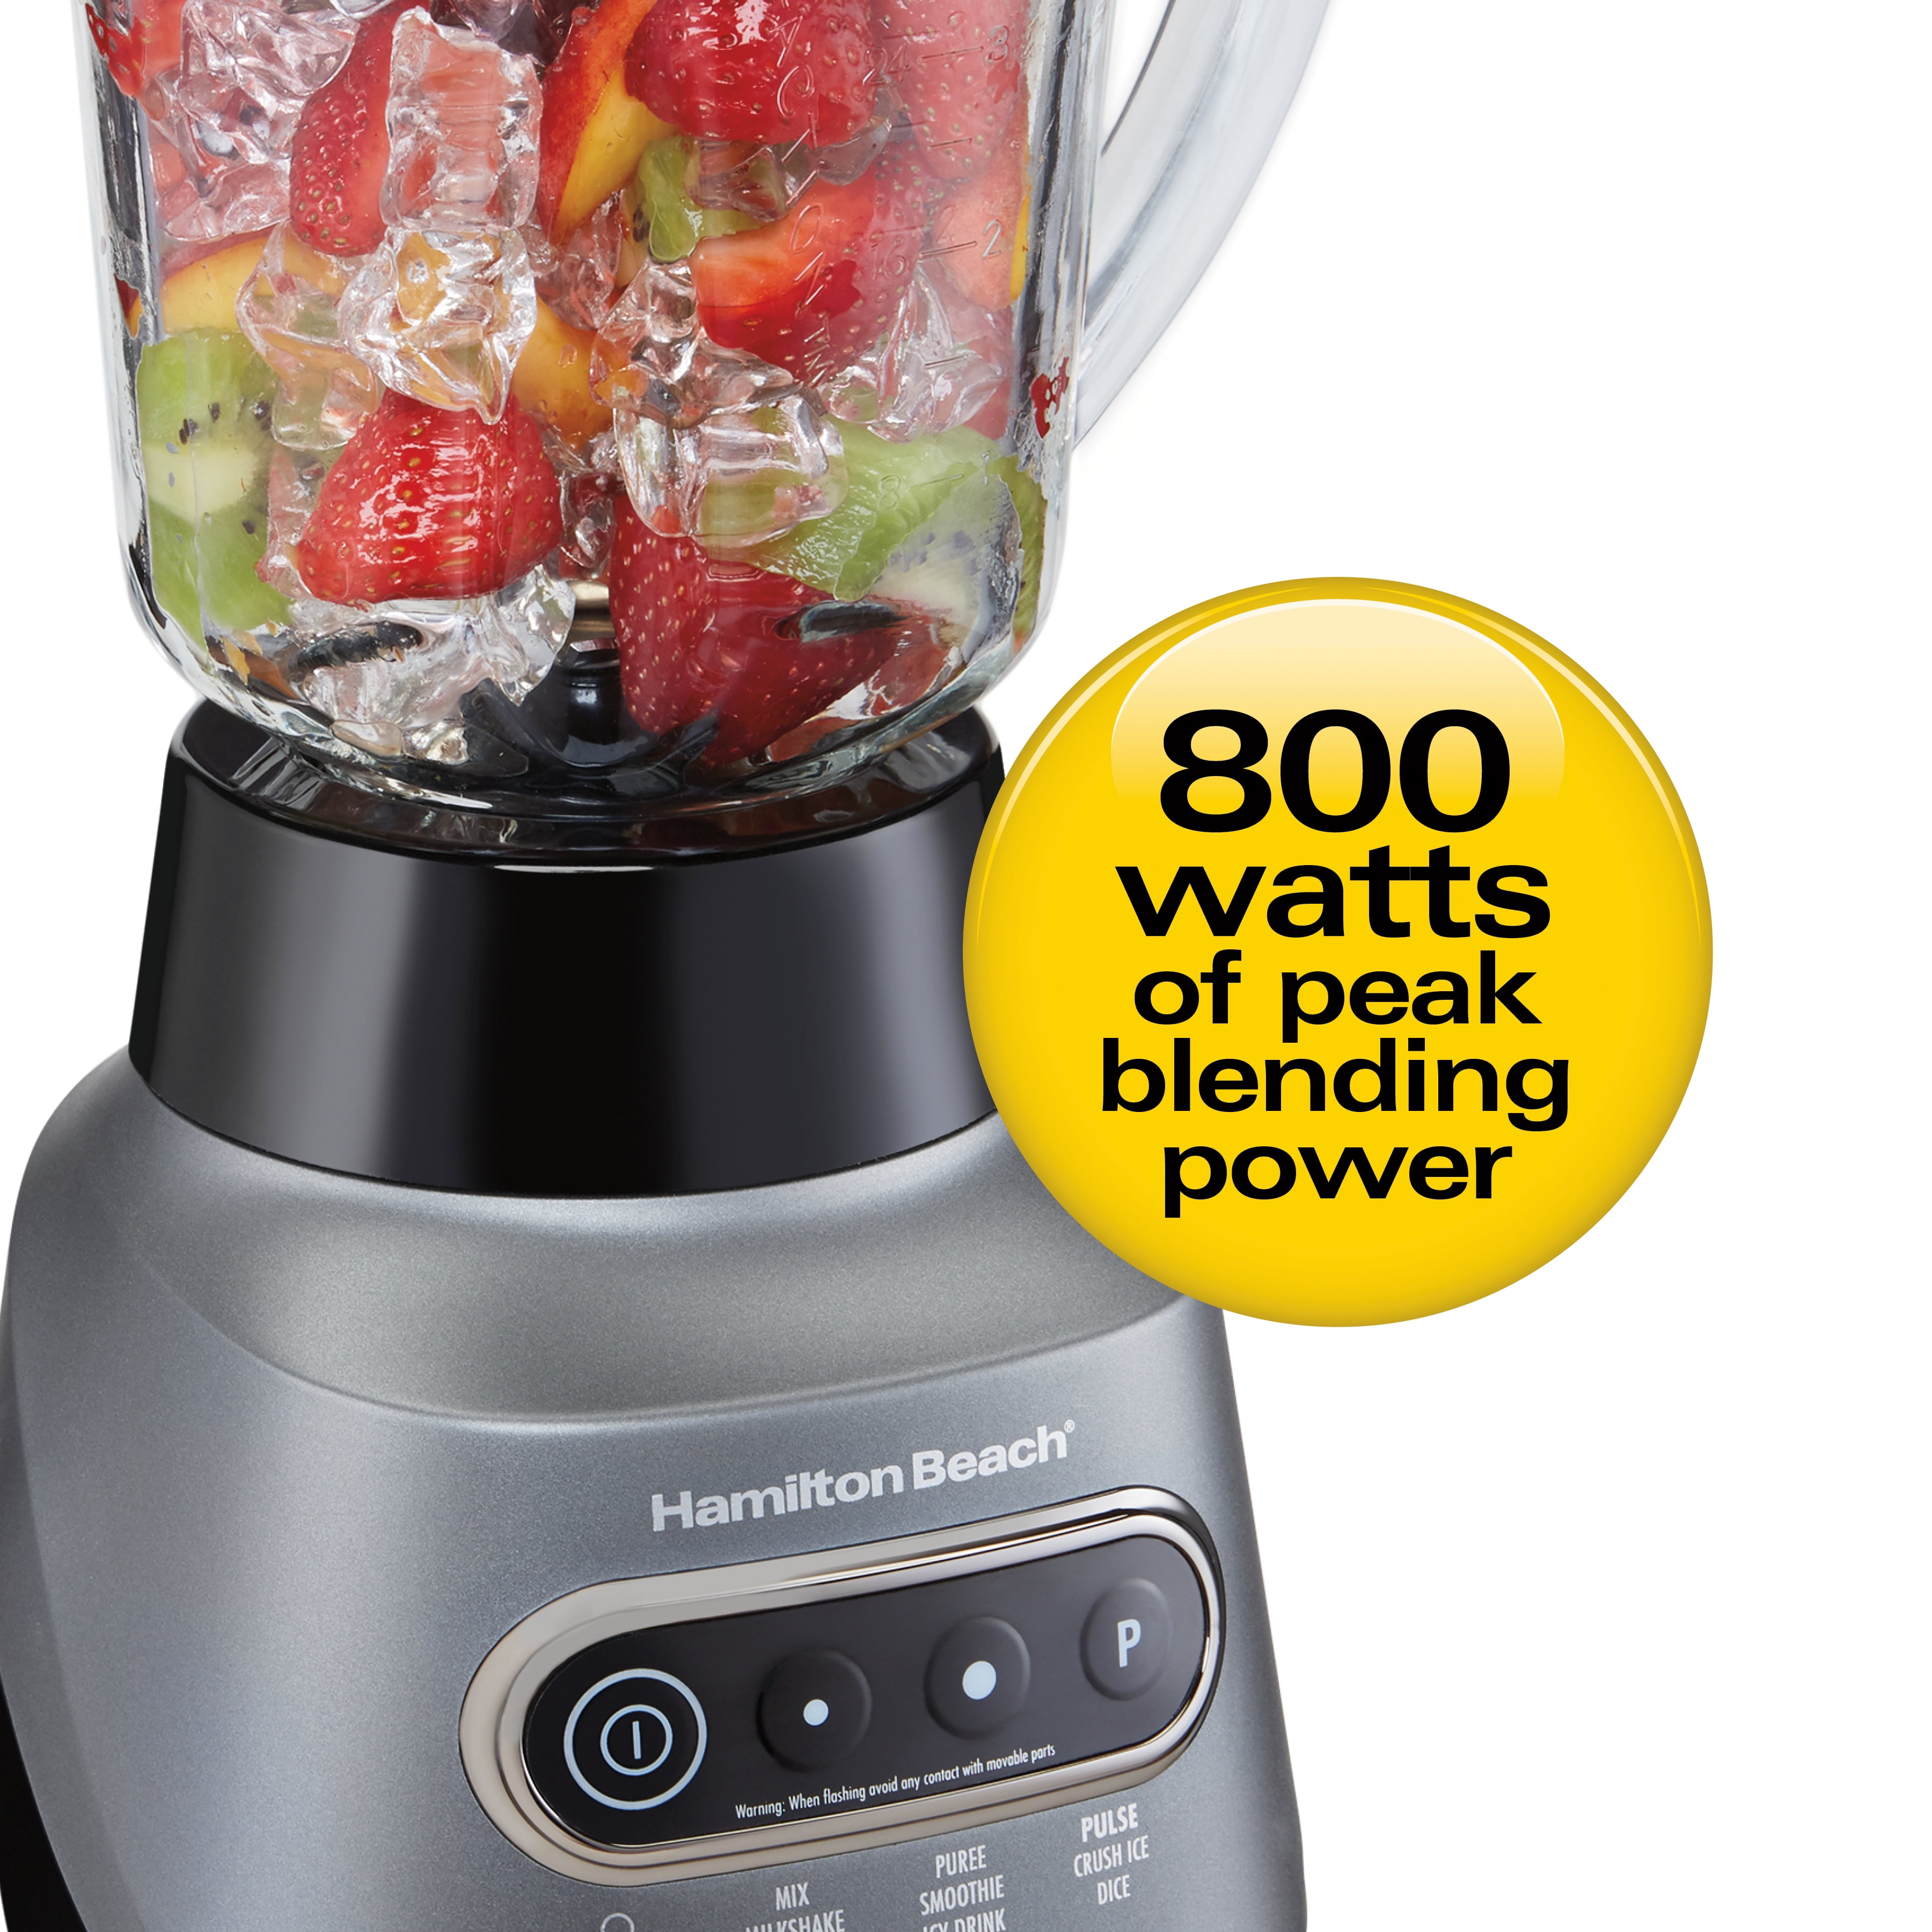 Hamilton Beach 40 oz. Wave Crusher Blender 58185 All the Power you Need NEW